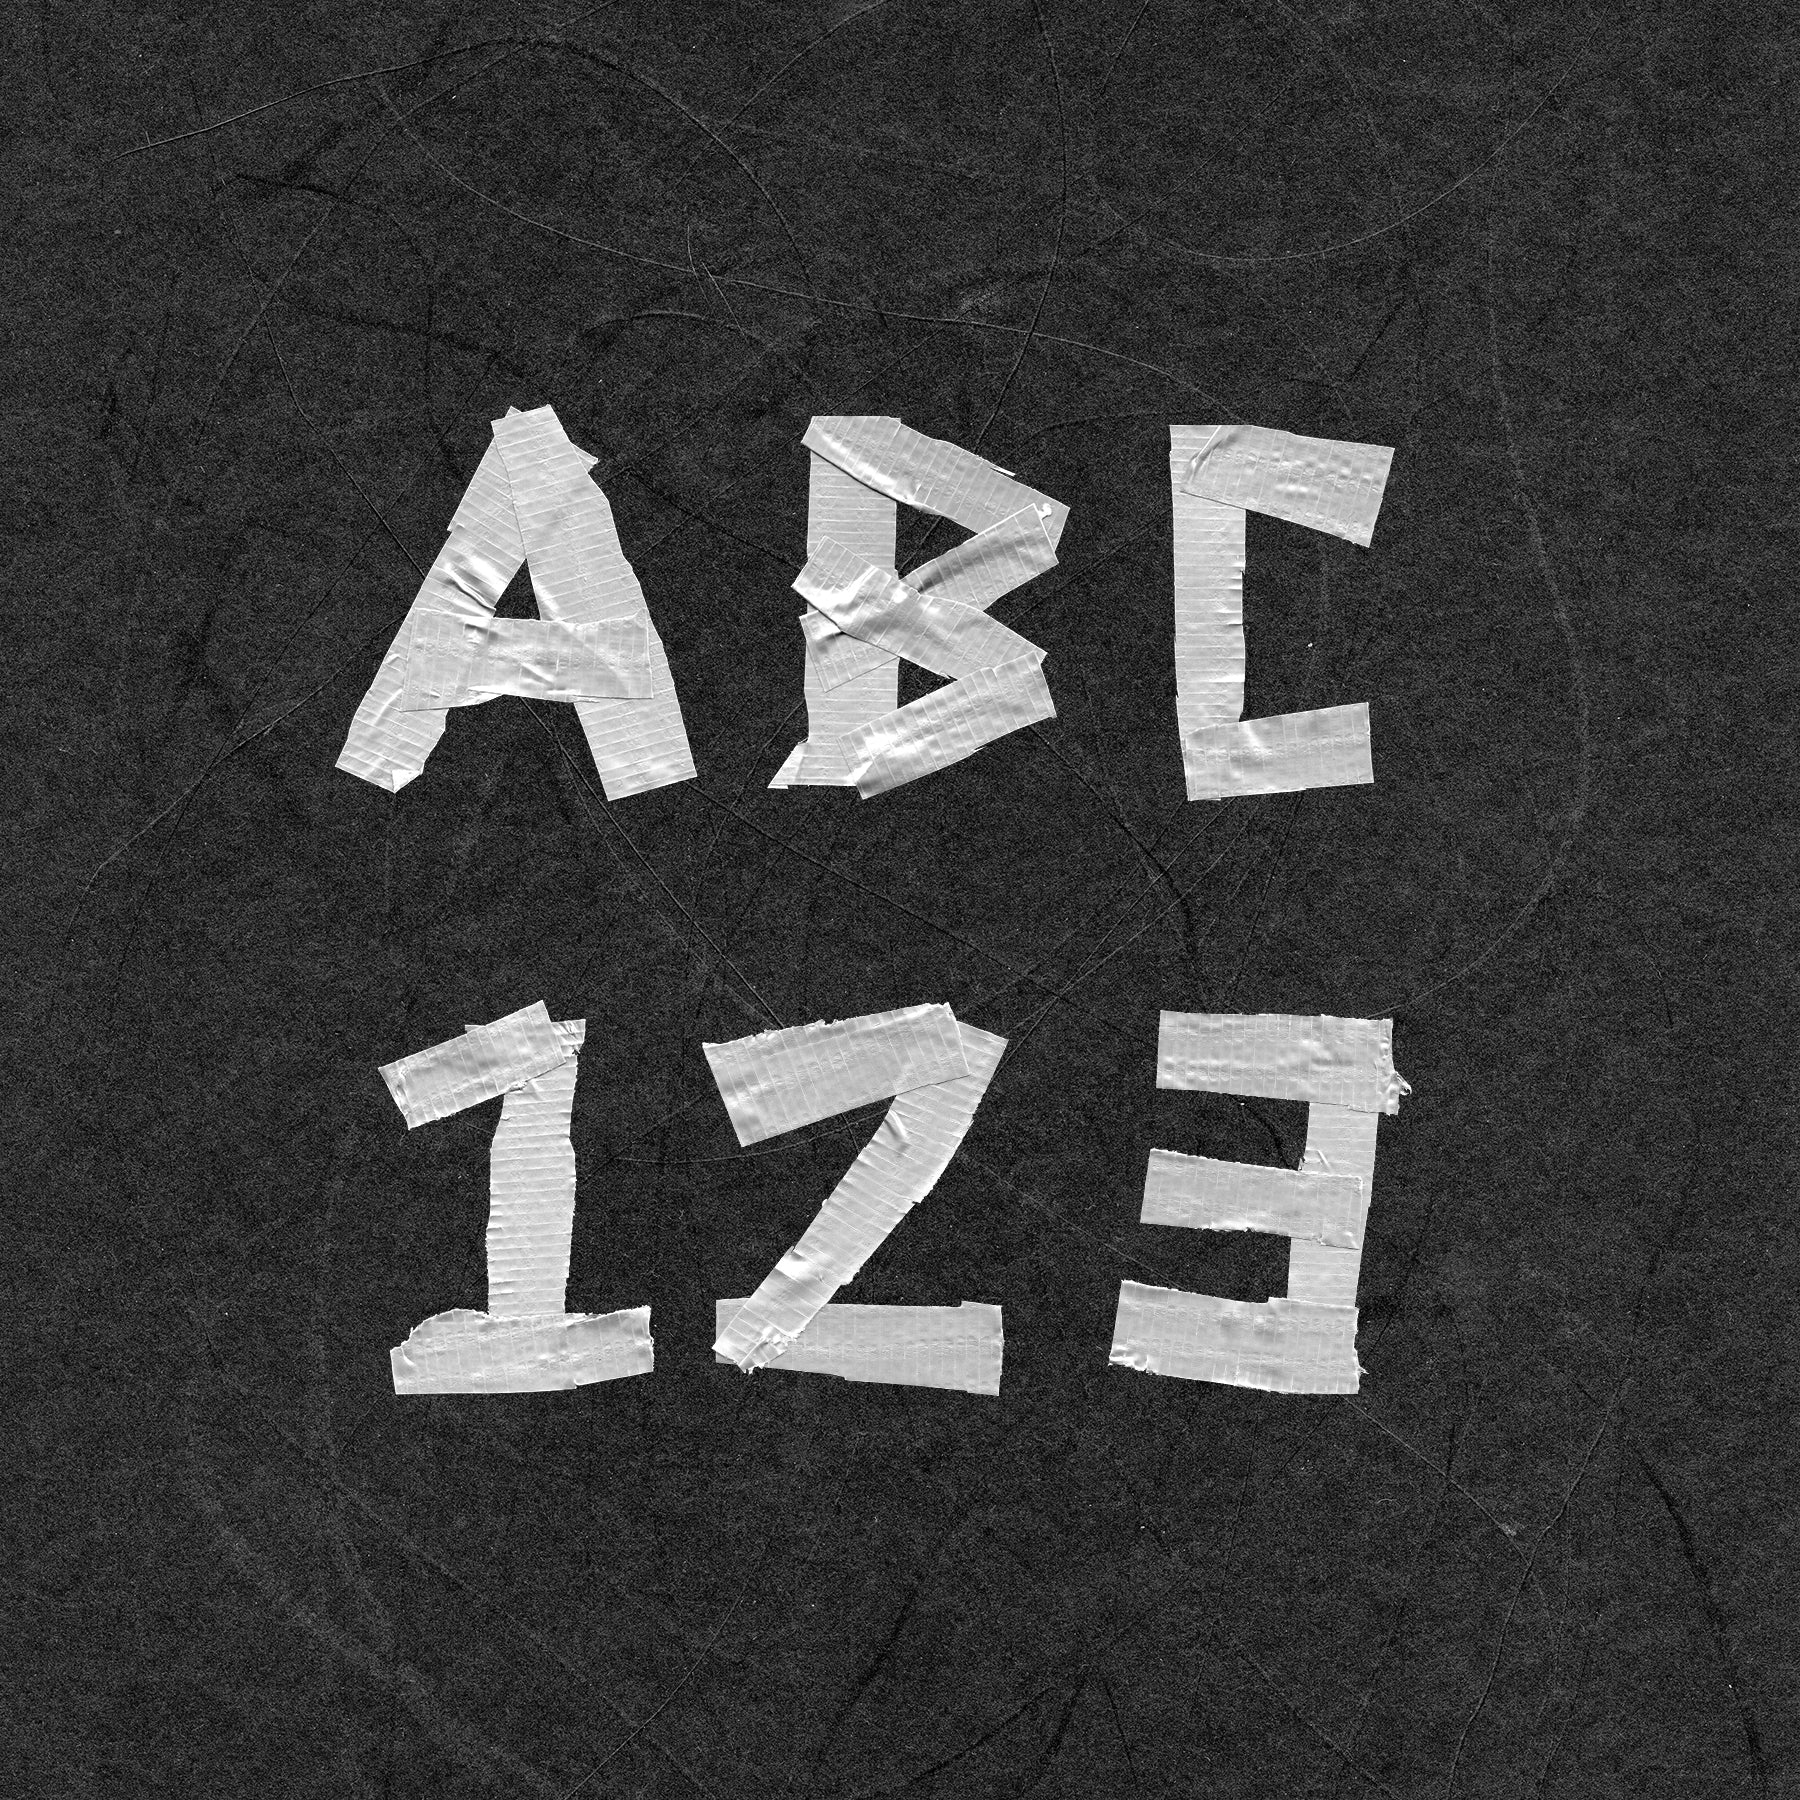 Text made out of duct tape on a textured background that reads "ABC 123".